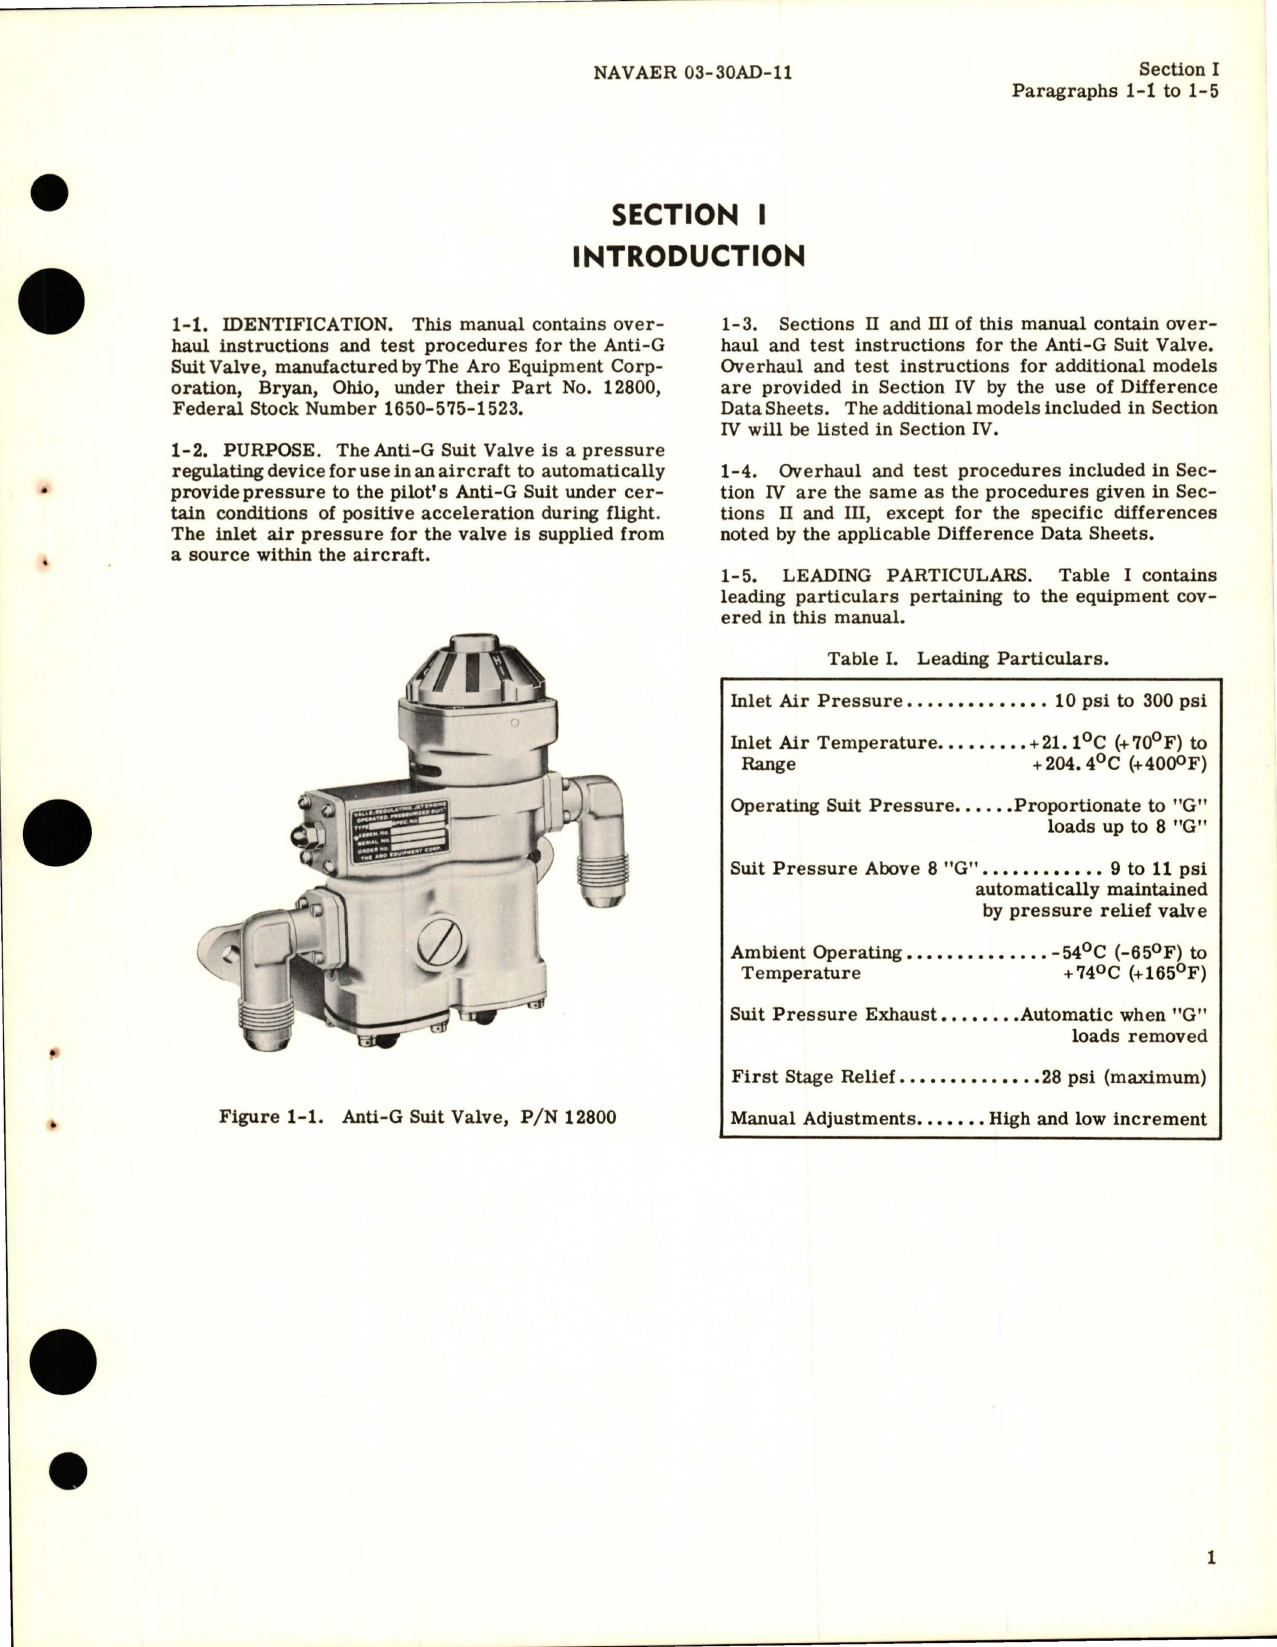 Sample page 5 from AirCorps Library document: Overhaul Instructions for Anti-G Suit Valve - Part 12800 